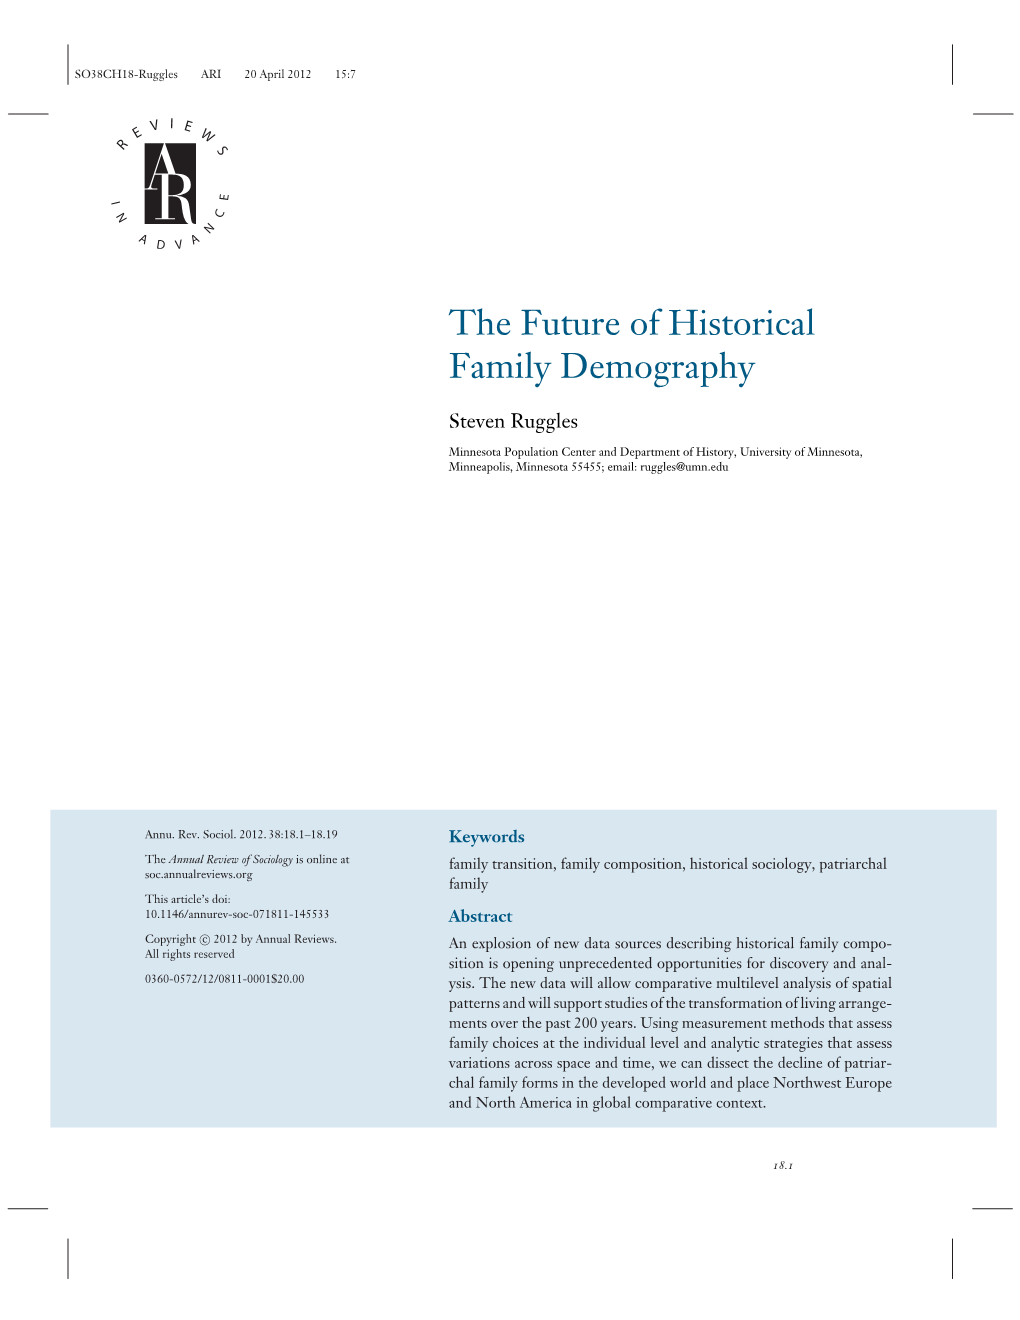 The Future of Historical Family Demography